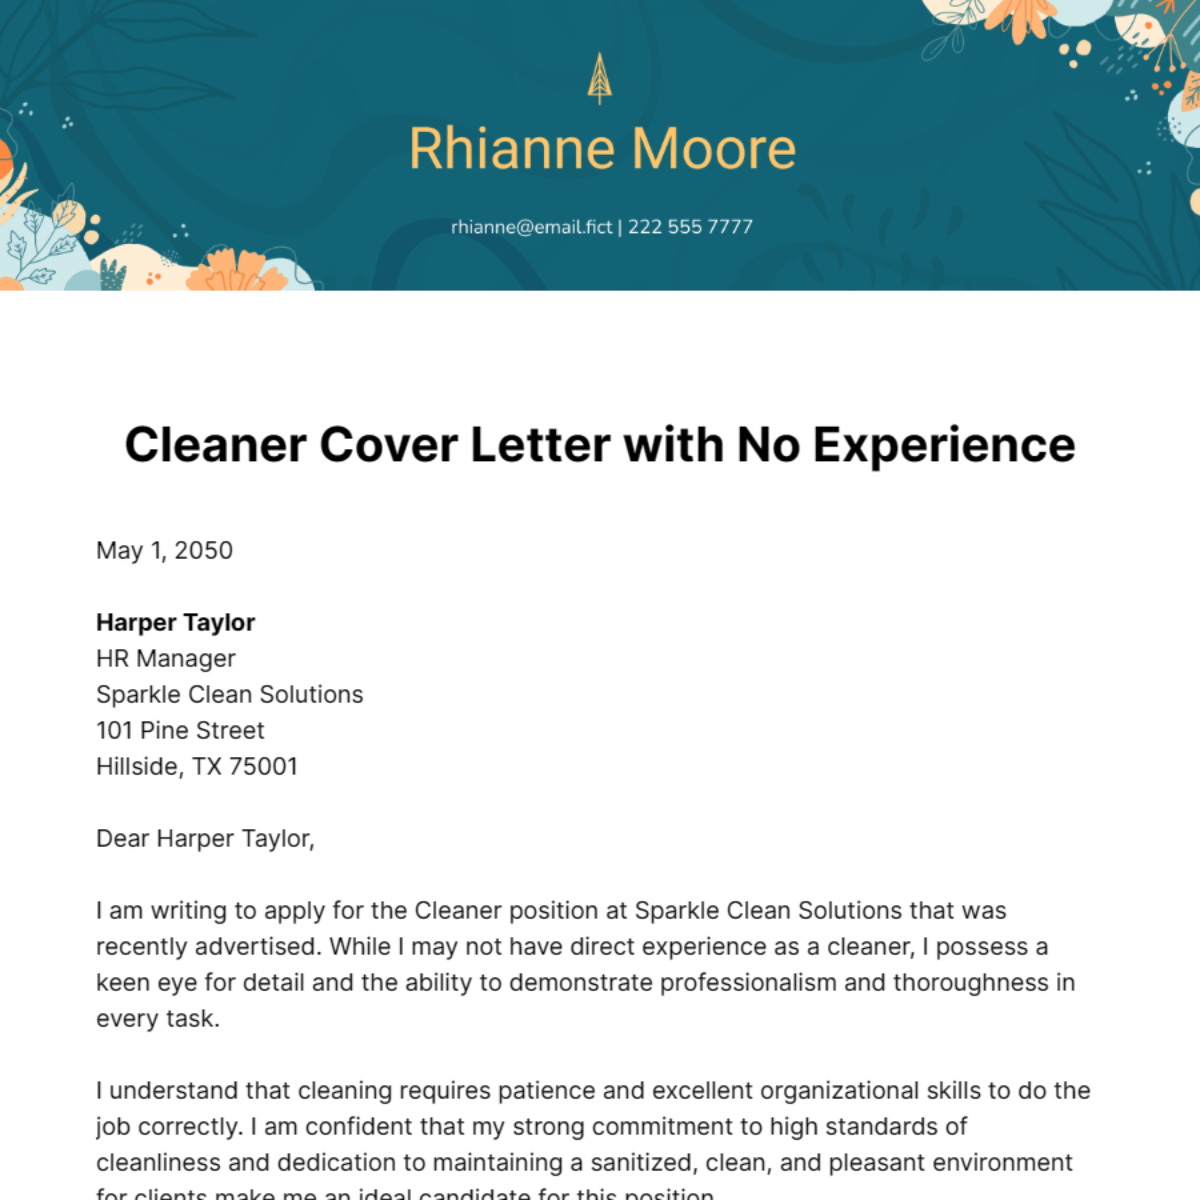 Cleaner Cover Letter with No Experience Template